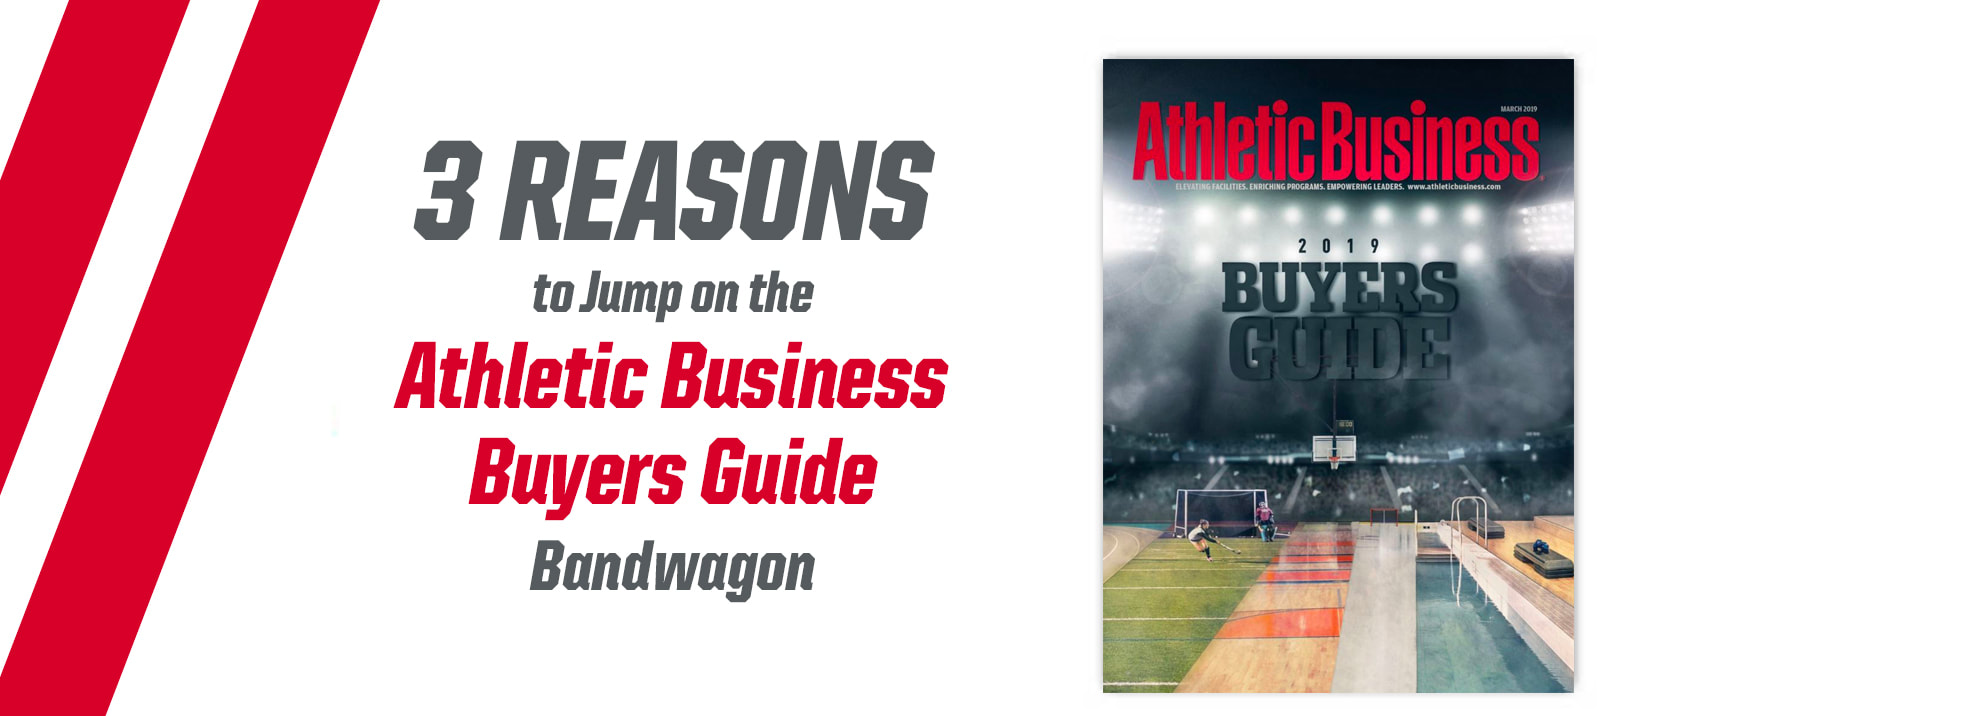 Athletic Business Buyers Guide Blog